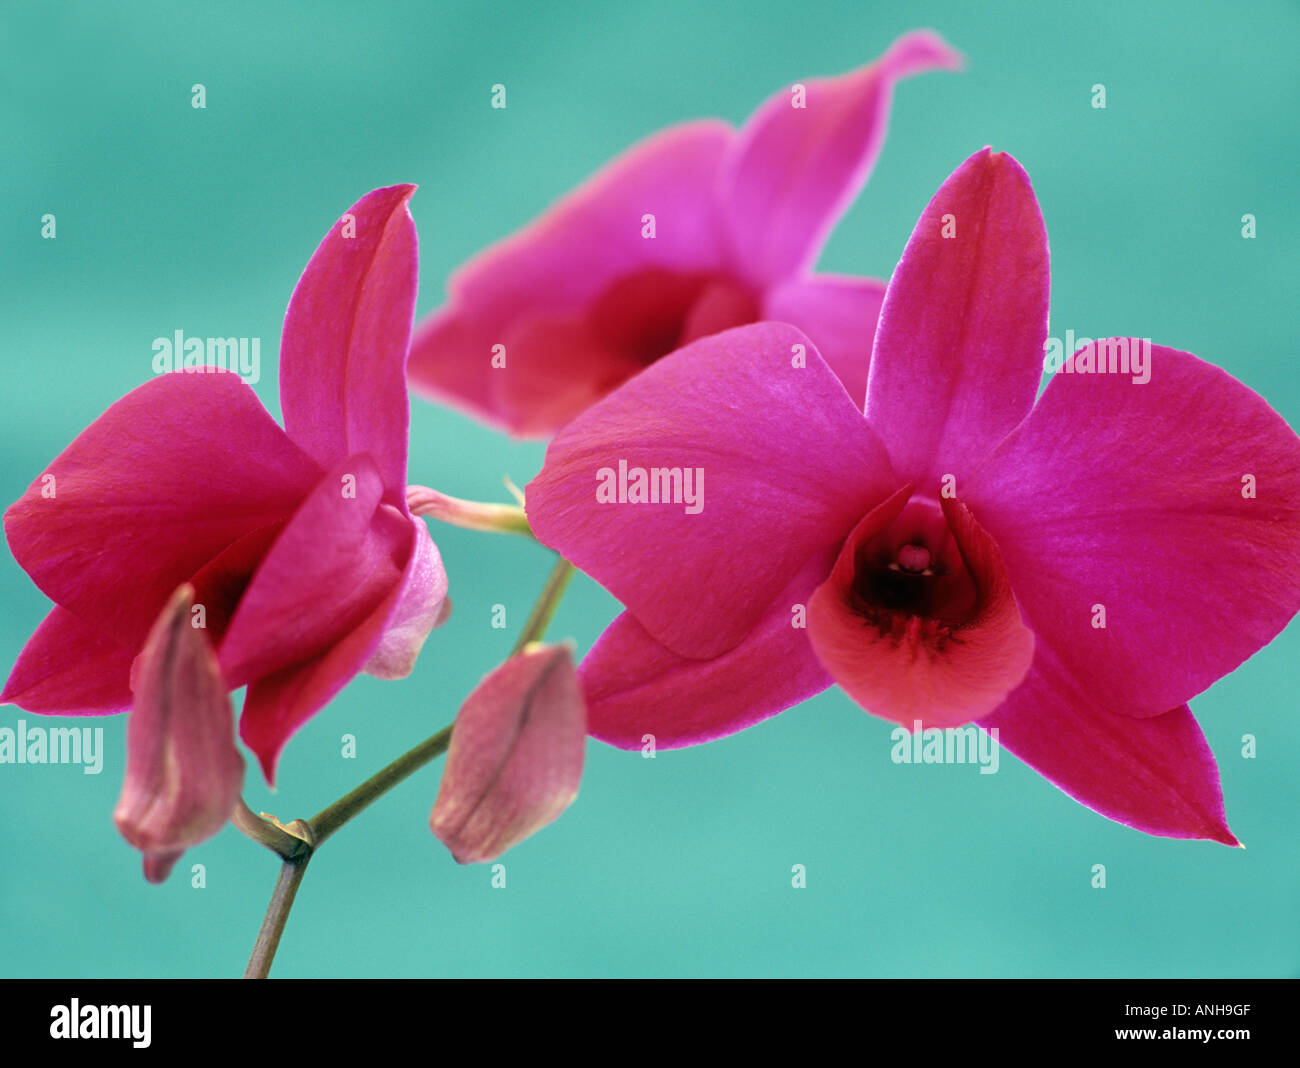 ORCHID FLOWERS Dendrobium phalaenopsis purple flowers in close up against pale green background Stock Photo